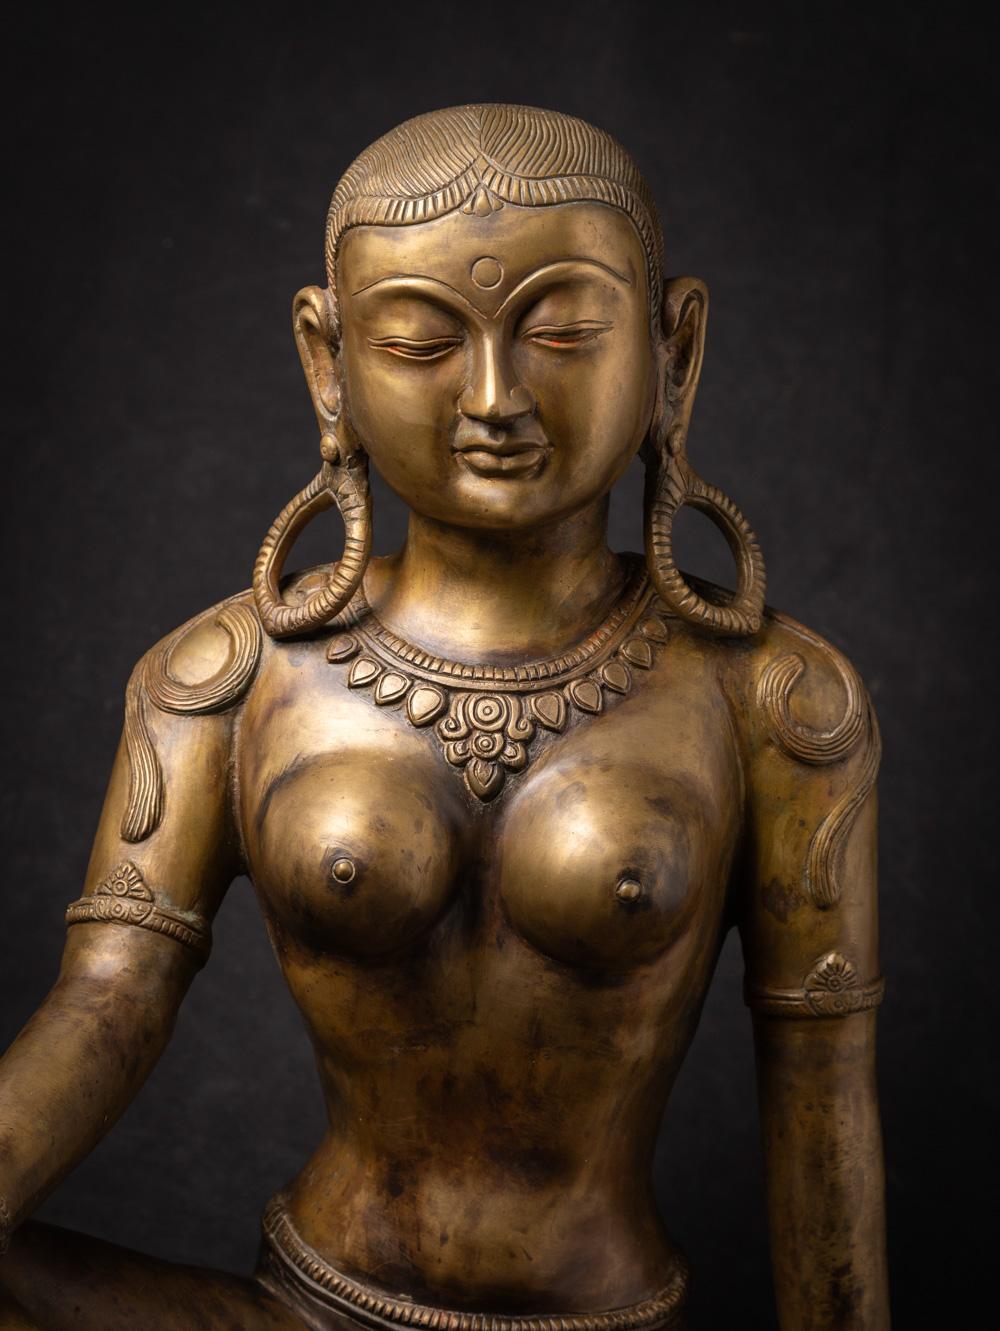 Material : bronze
47 cm high
43 cm wide and 37,2 cm deep
With a beautiful expression !
Late 20th century
Weight: 14,4 kgs
Originating from Nepal
Nr: PARV-232